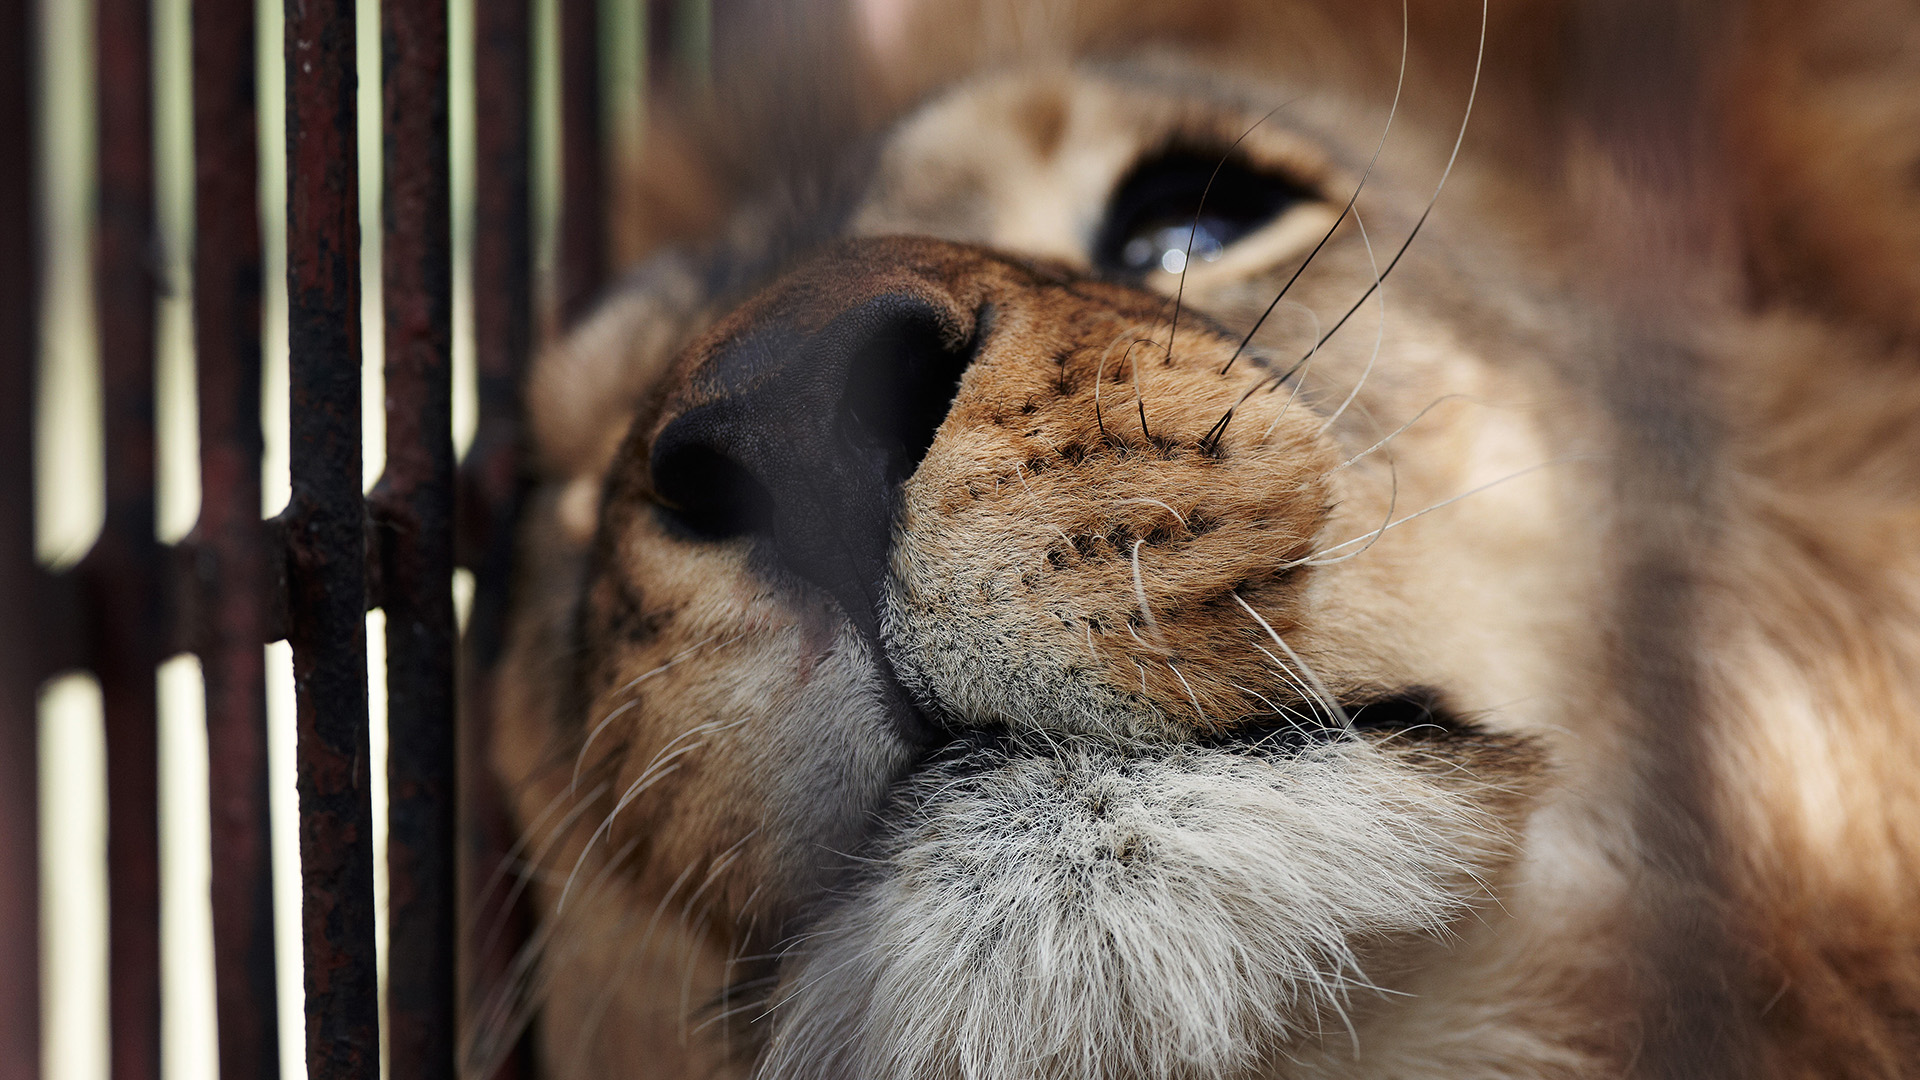 Close up of a lion leaning its head against bars